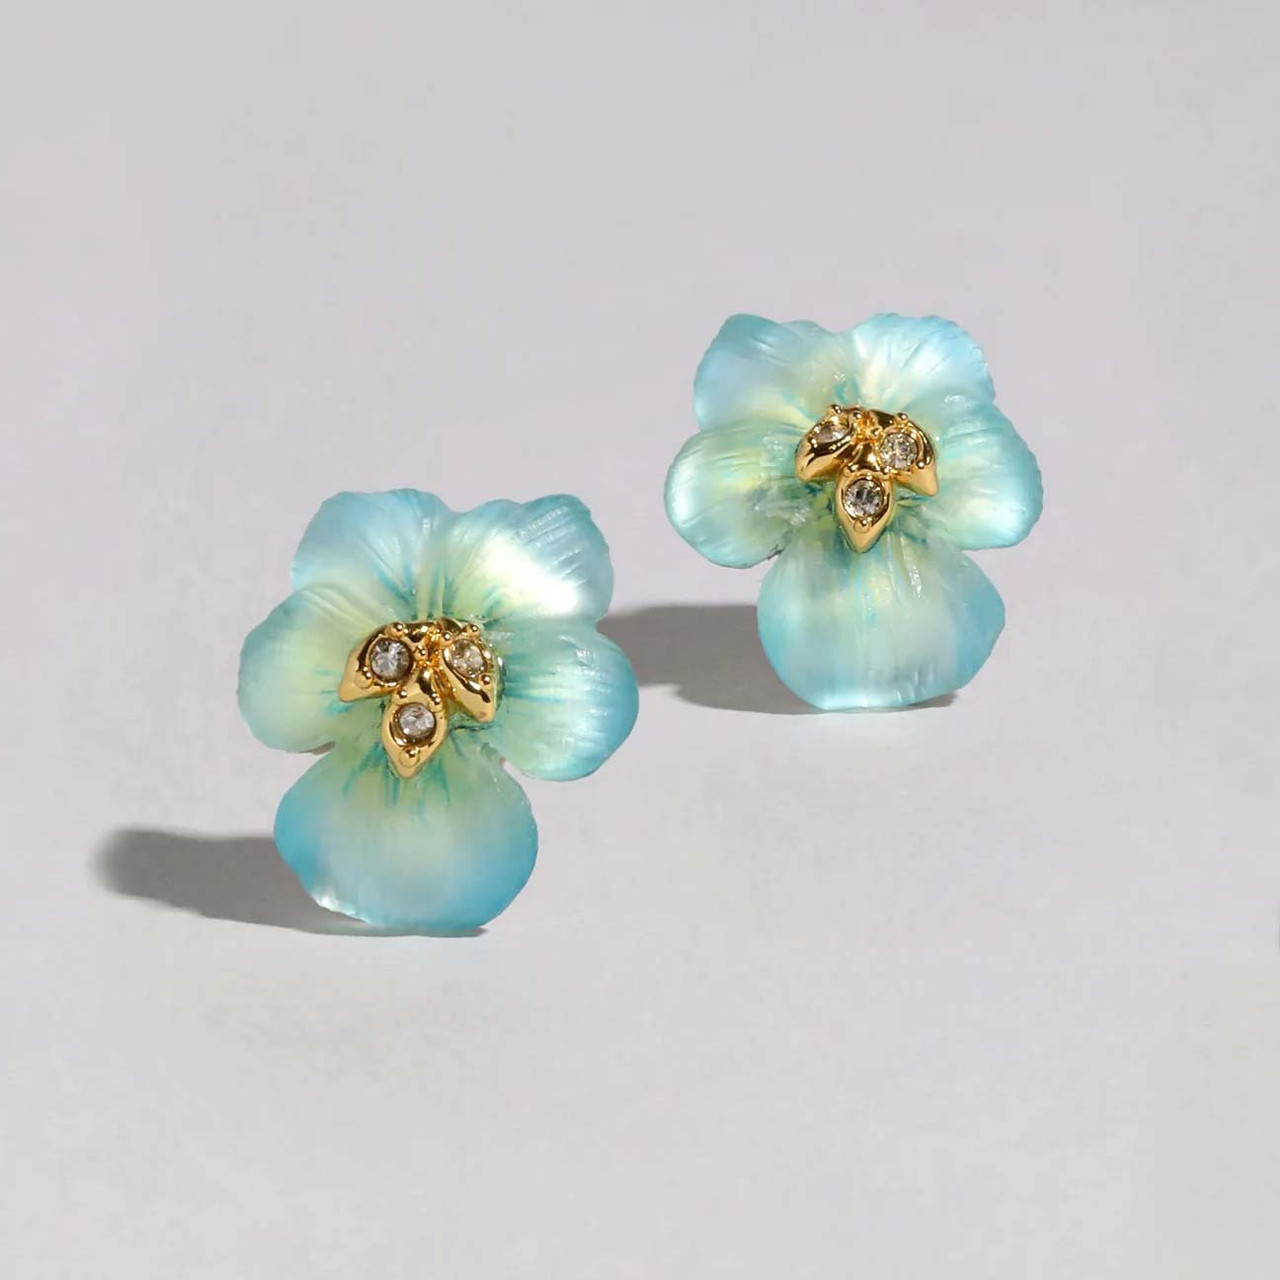 Blue Pansy Lucite Studs, Alexis Bittar, tomfoolery